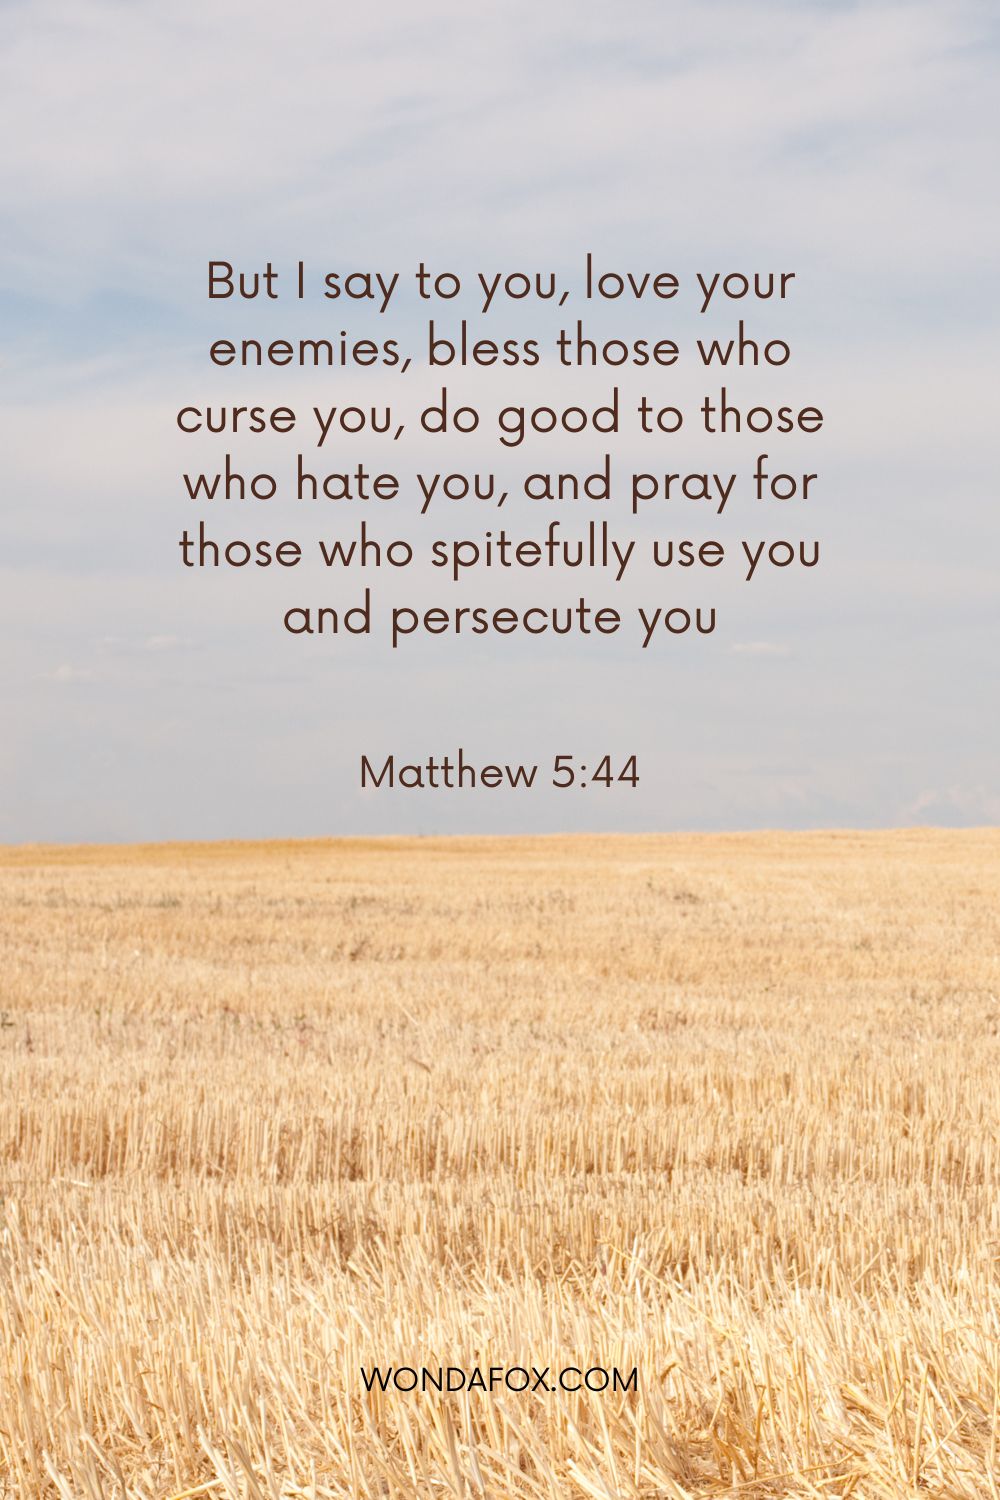 But I say to you, love your enemies, bless those who curse you, do good to those who hate you, and pray for those who spitefully use you and persecute you,